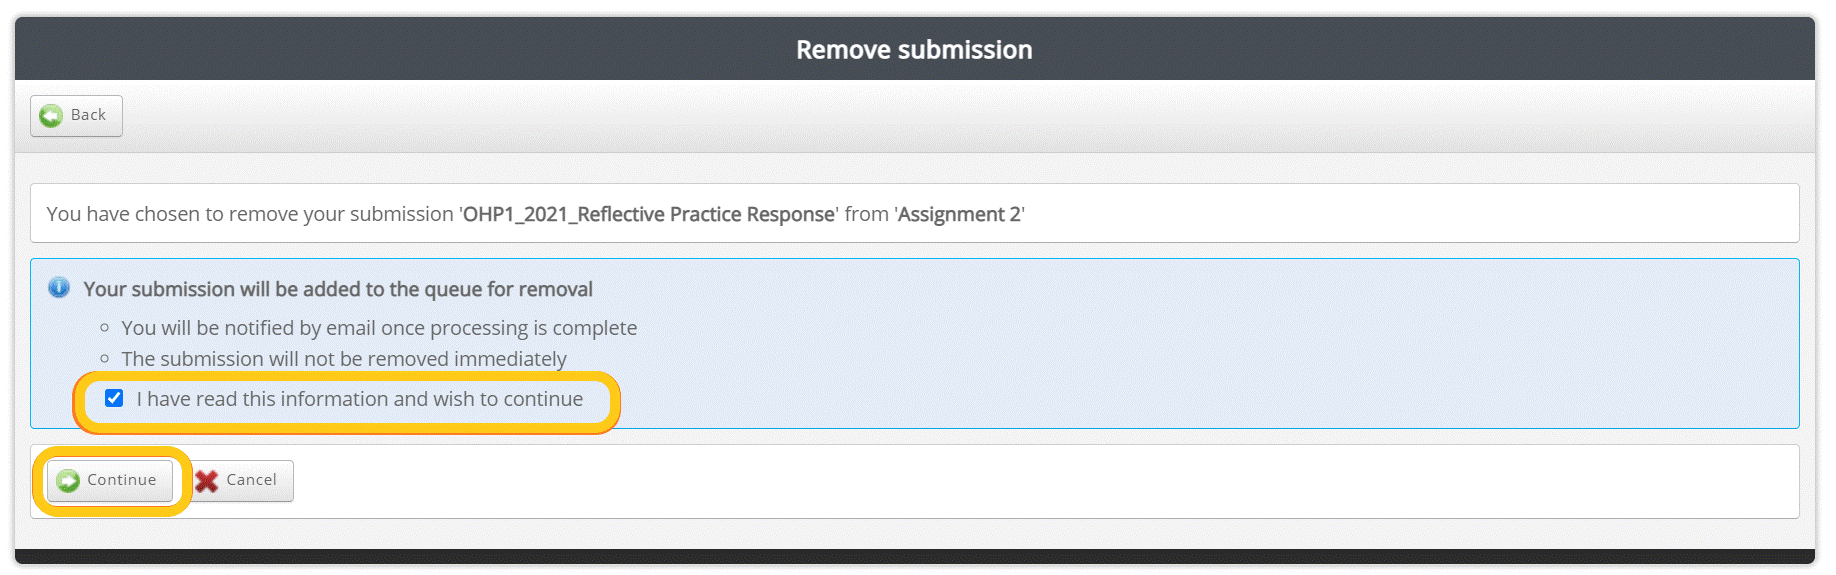 Removing assessment submission from ATLAS